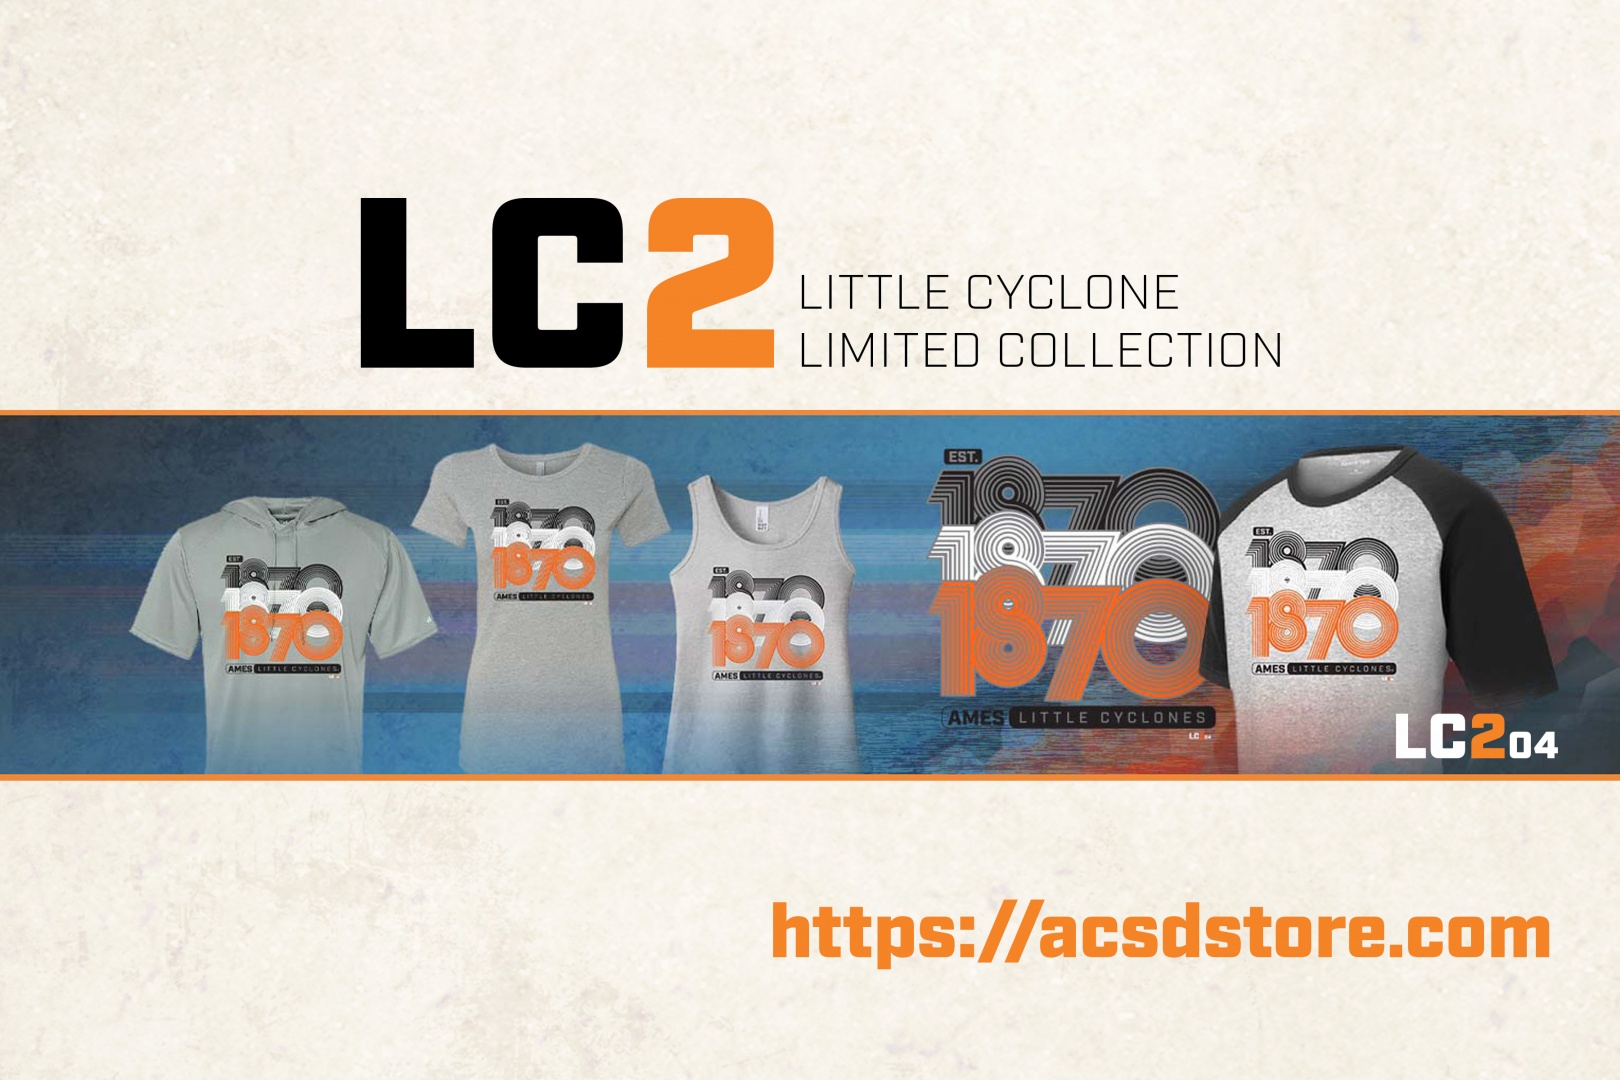 LC2: Little Cyclone Limited Collection